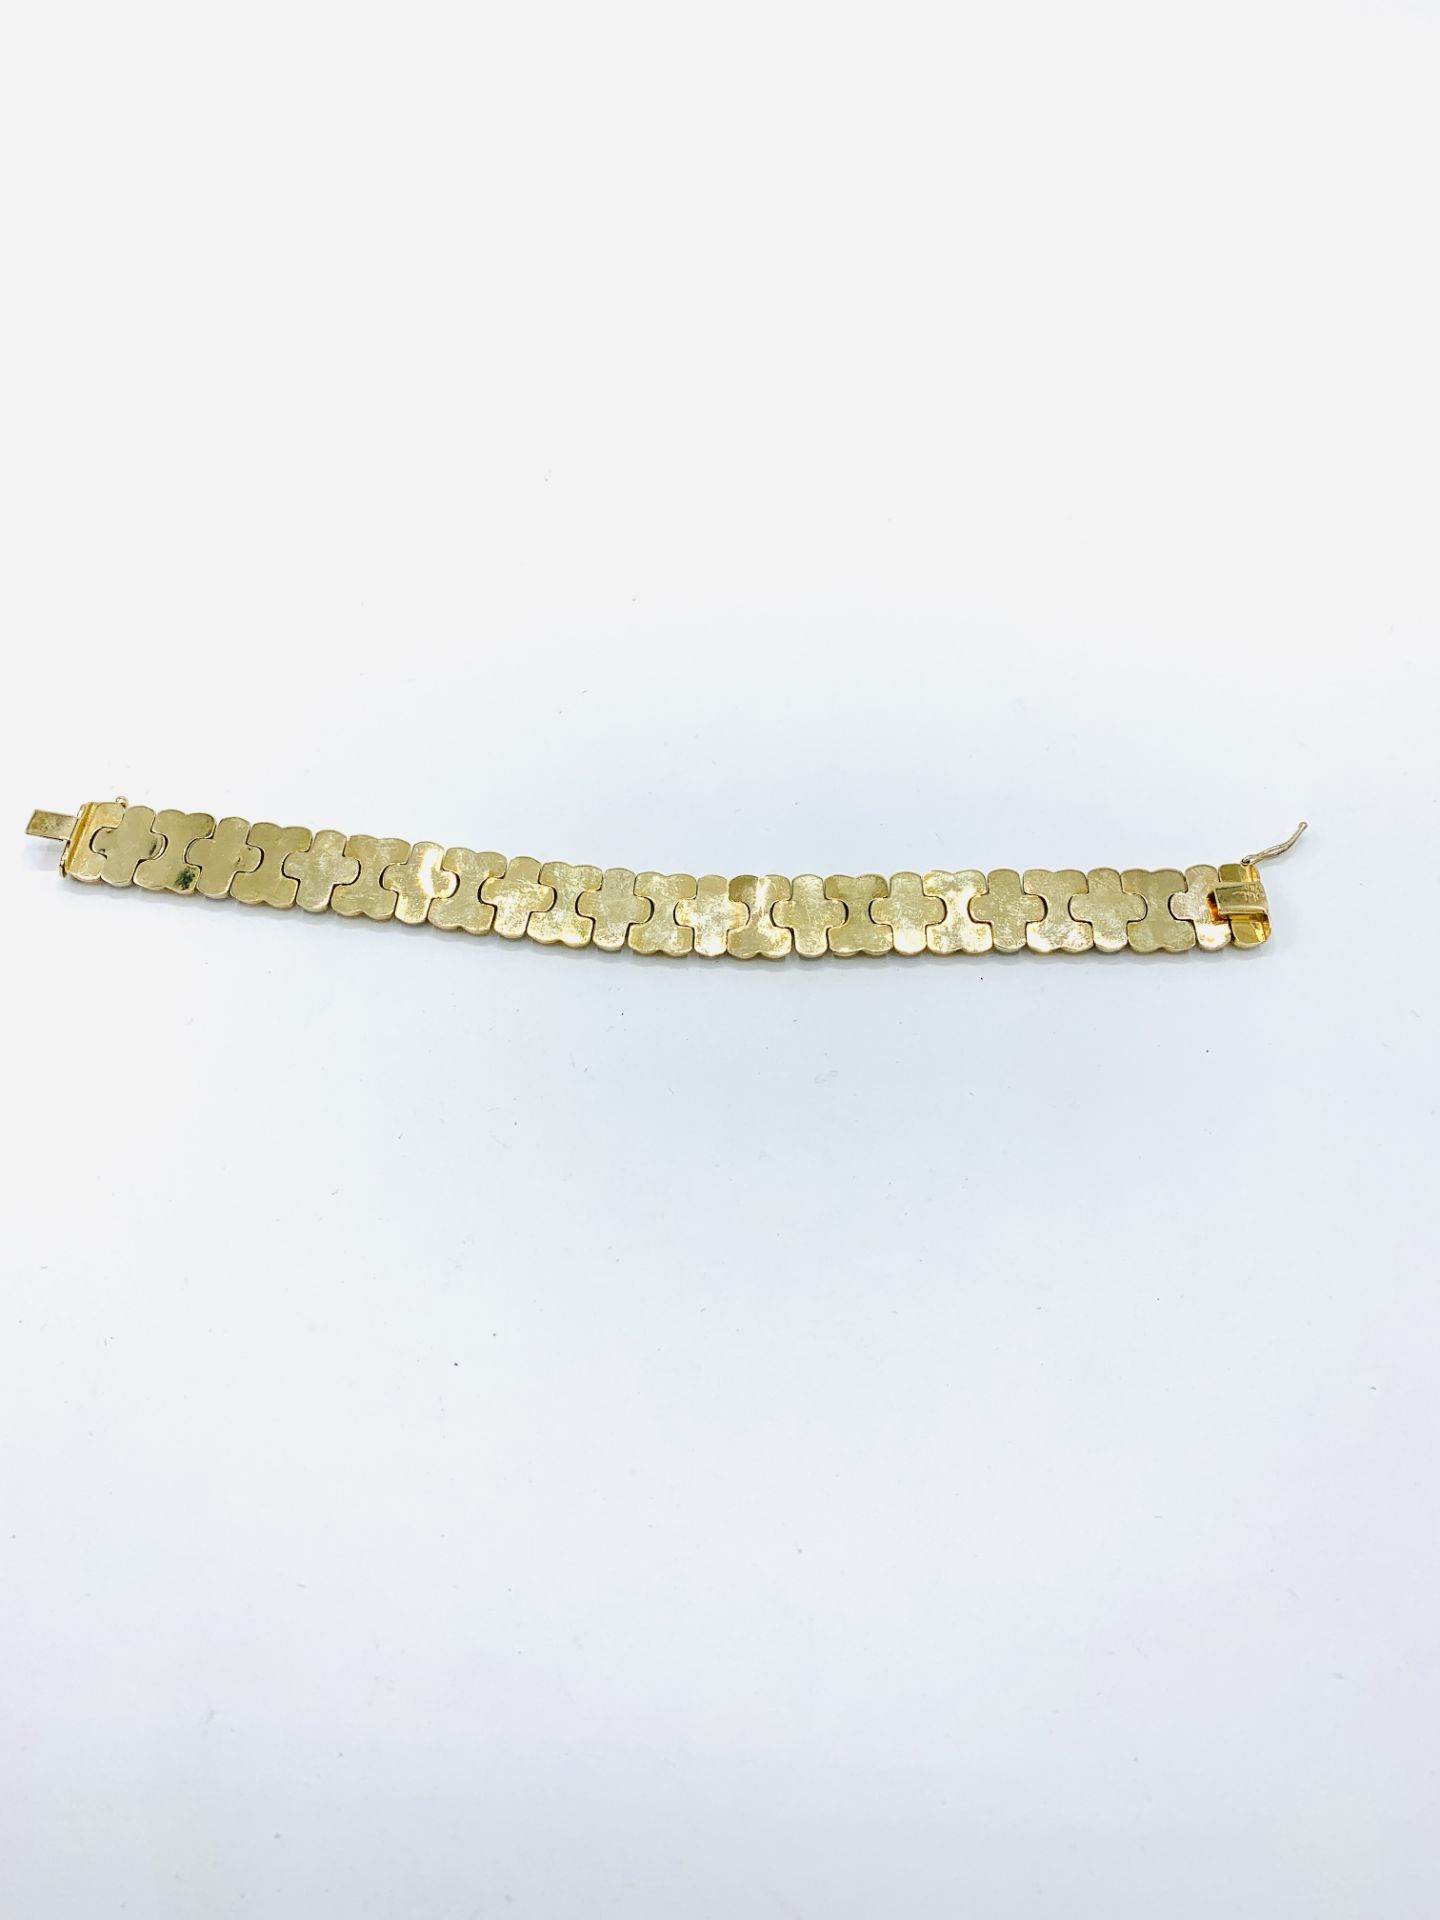 750 white and yellow gold link bracelet - Image 5 of 5